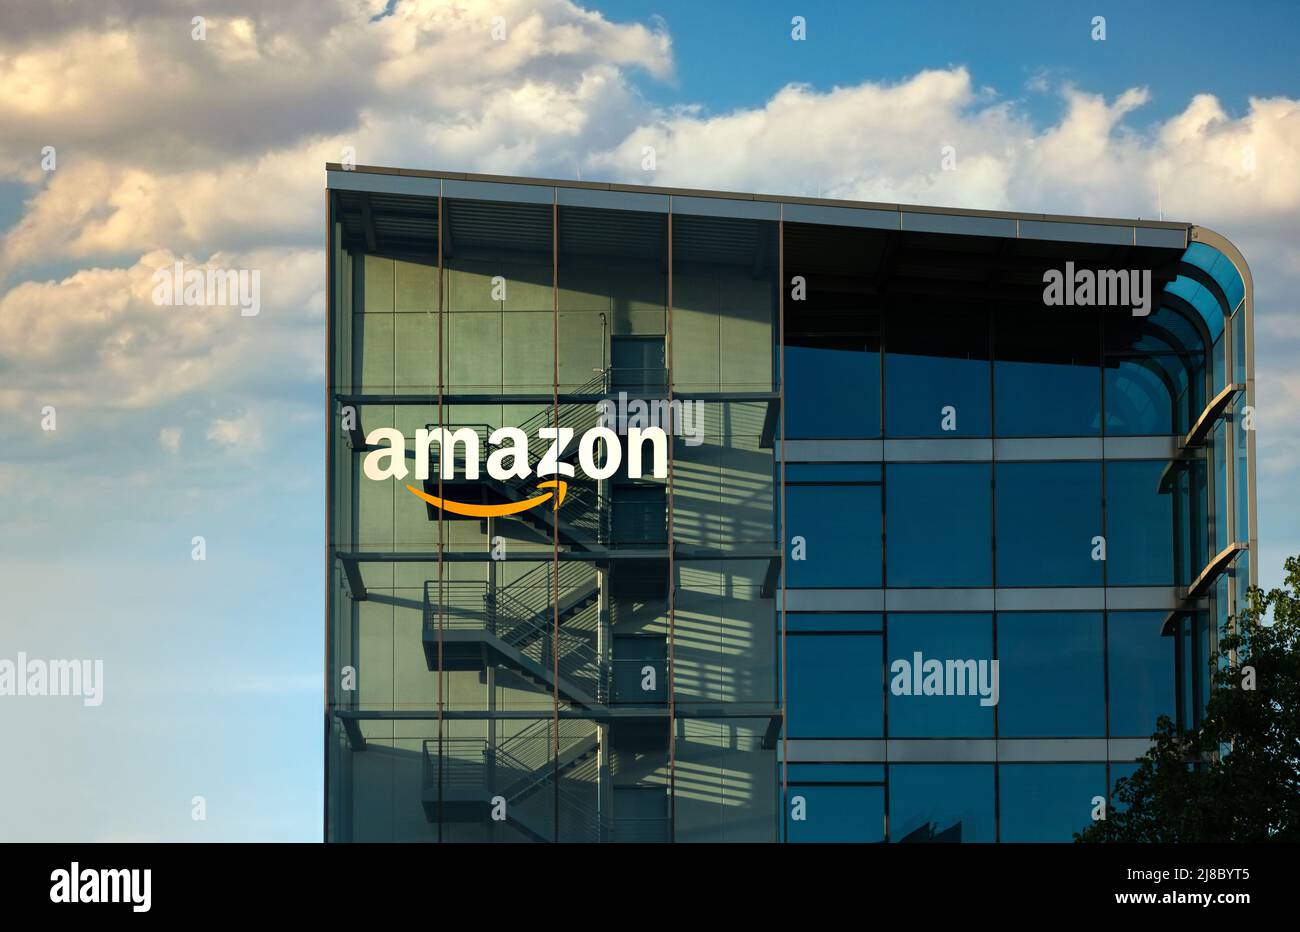 May 15, 2022 Munich, Germany: Amazon logo on their headquarter building Stock Photo